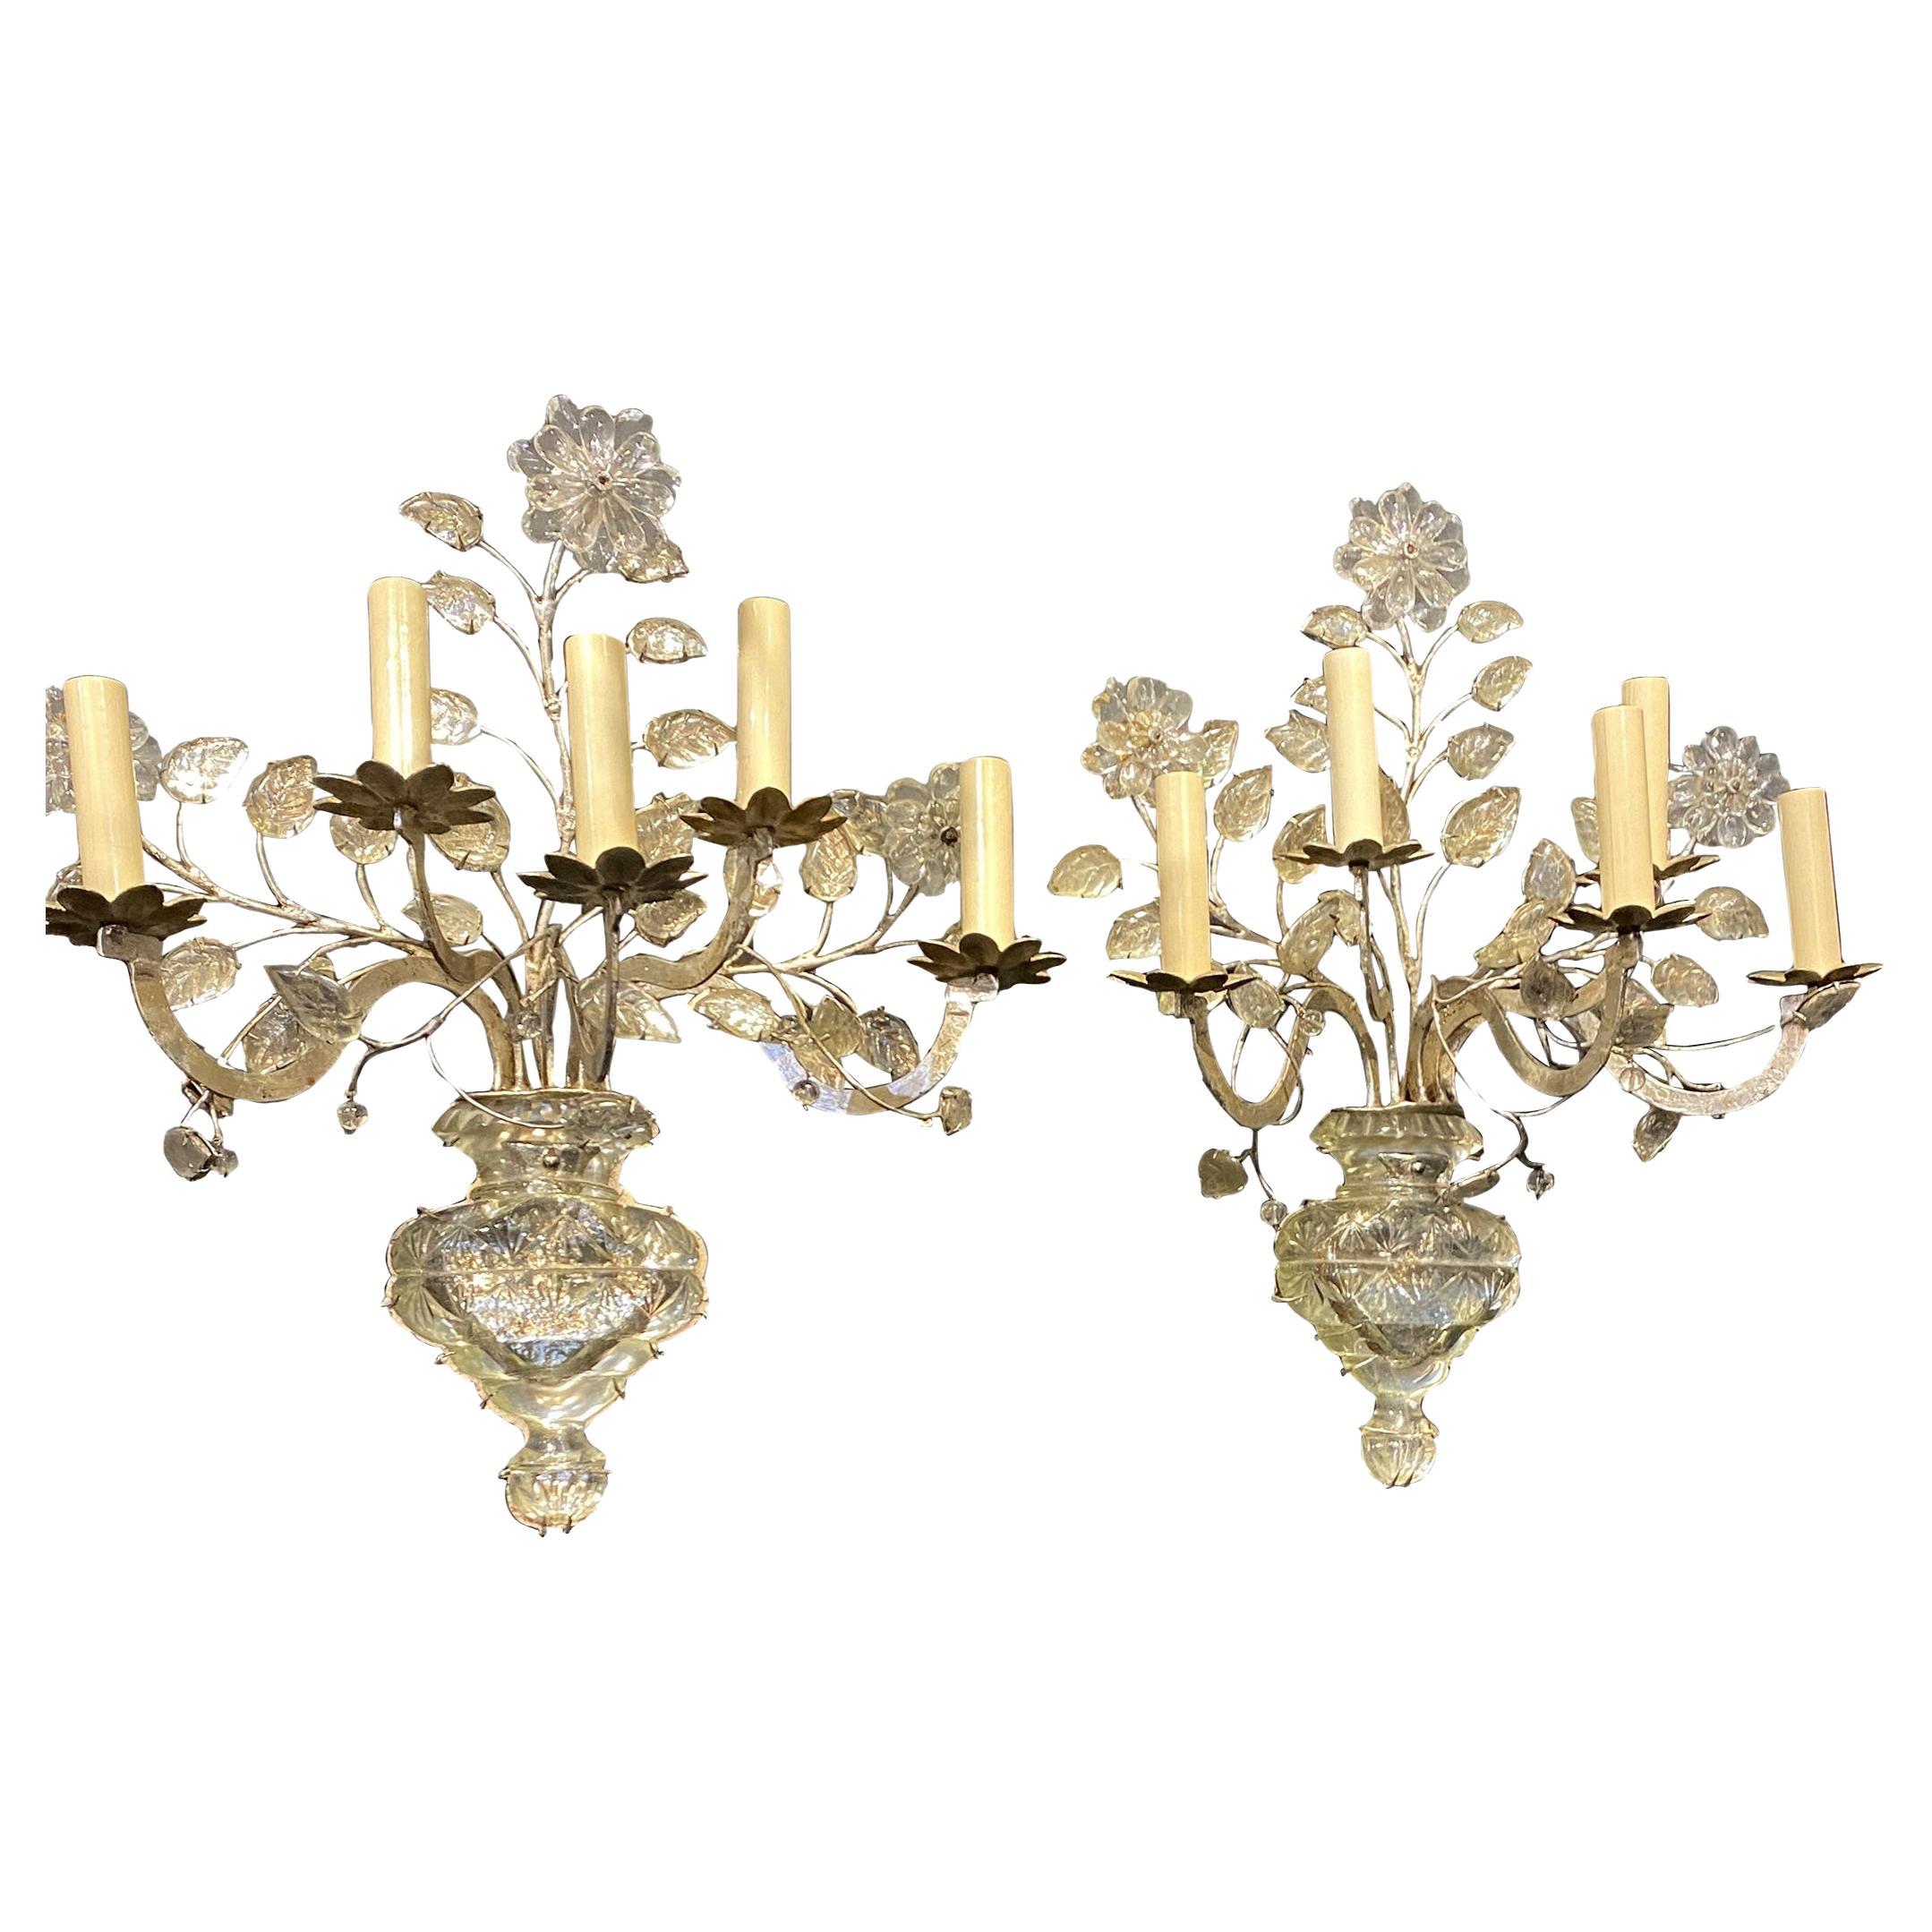 1930's French Bagues Silvered Metal 5 Lights Sconces with Crystals For Sale